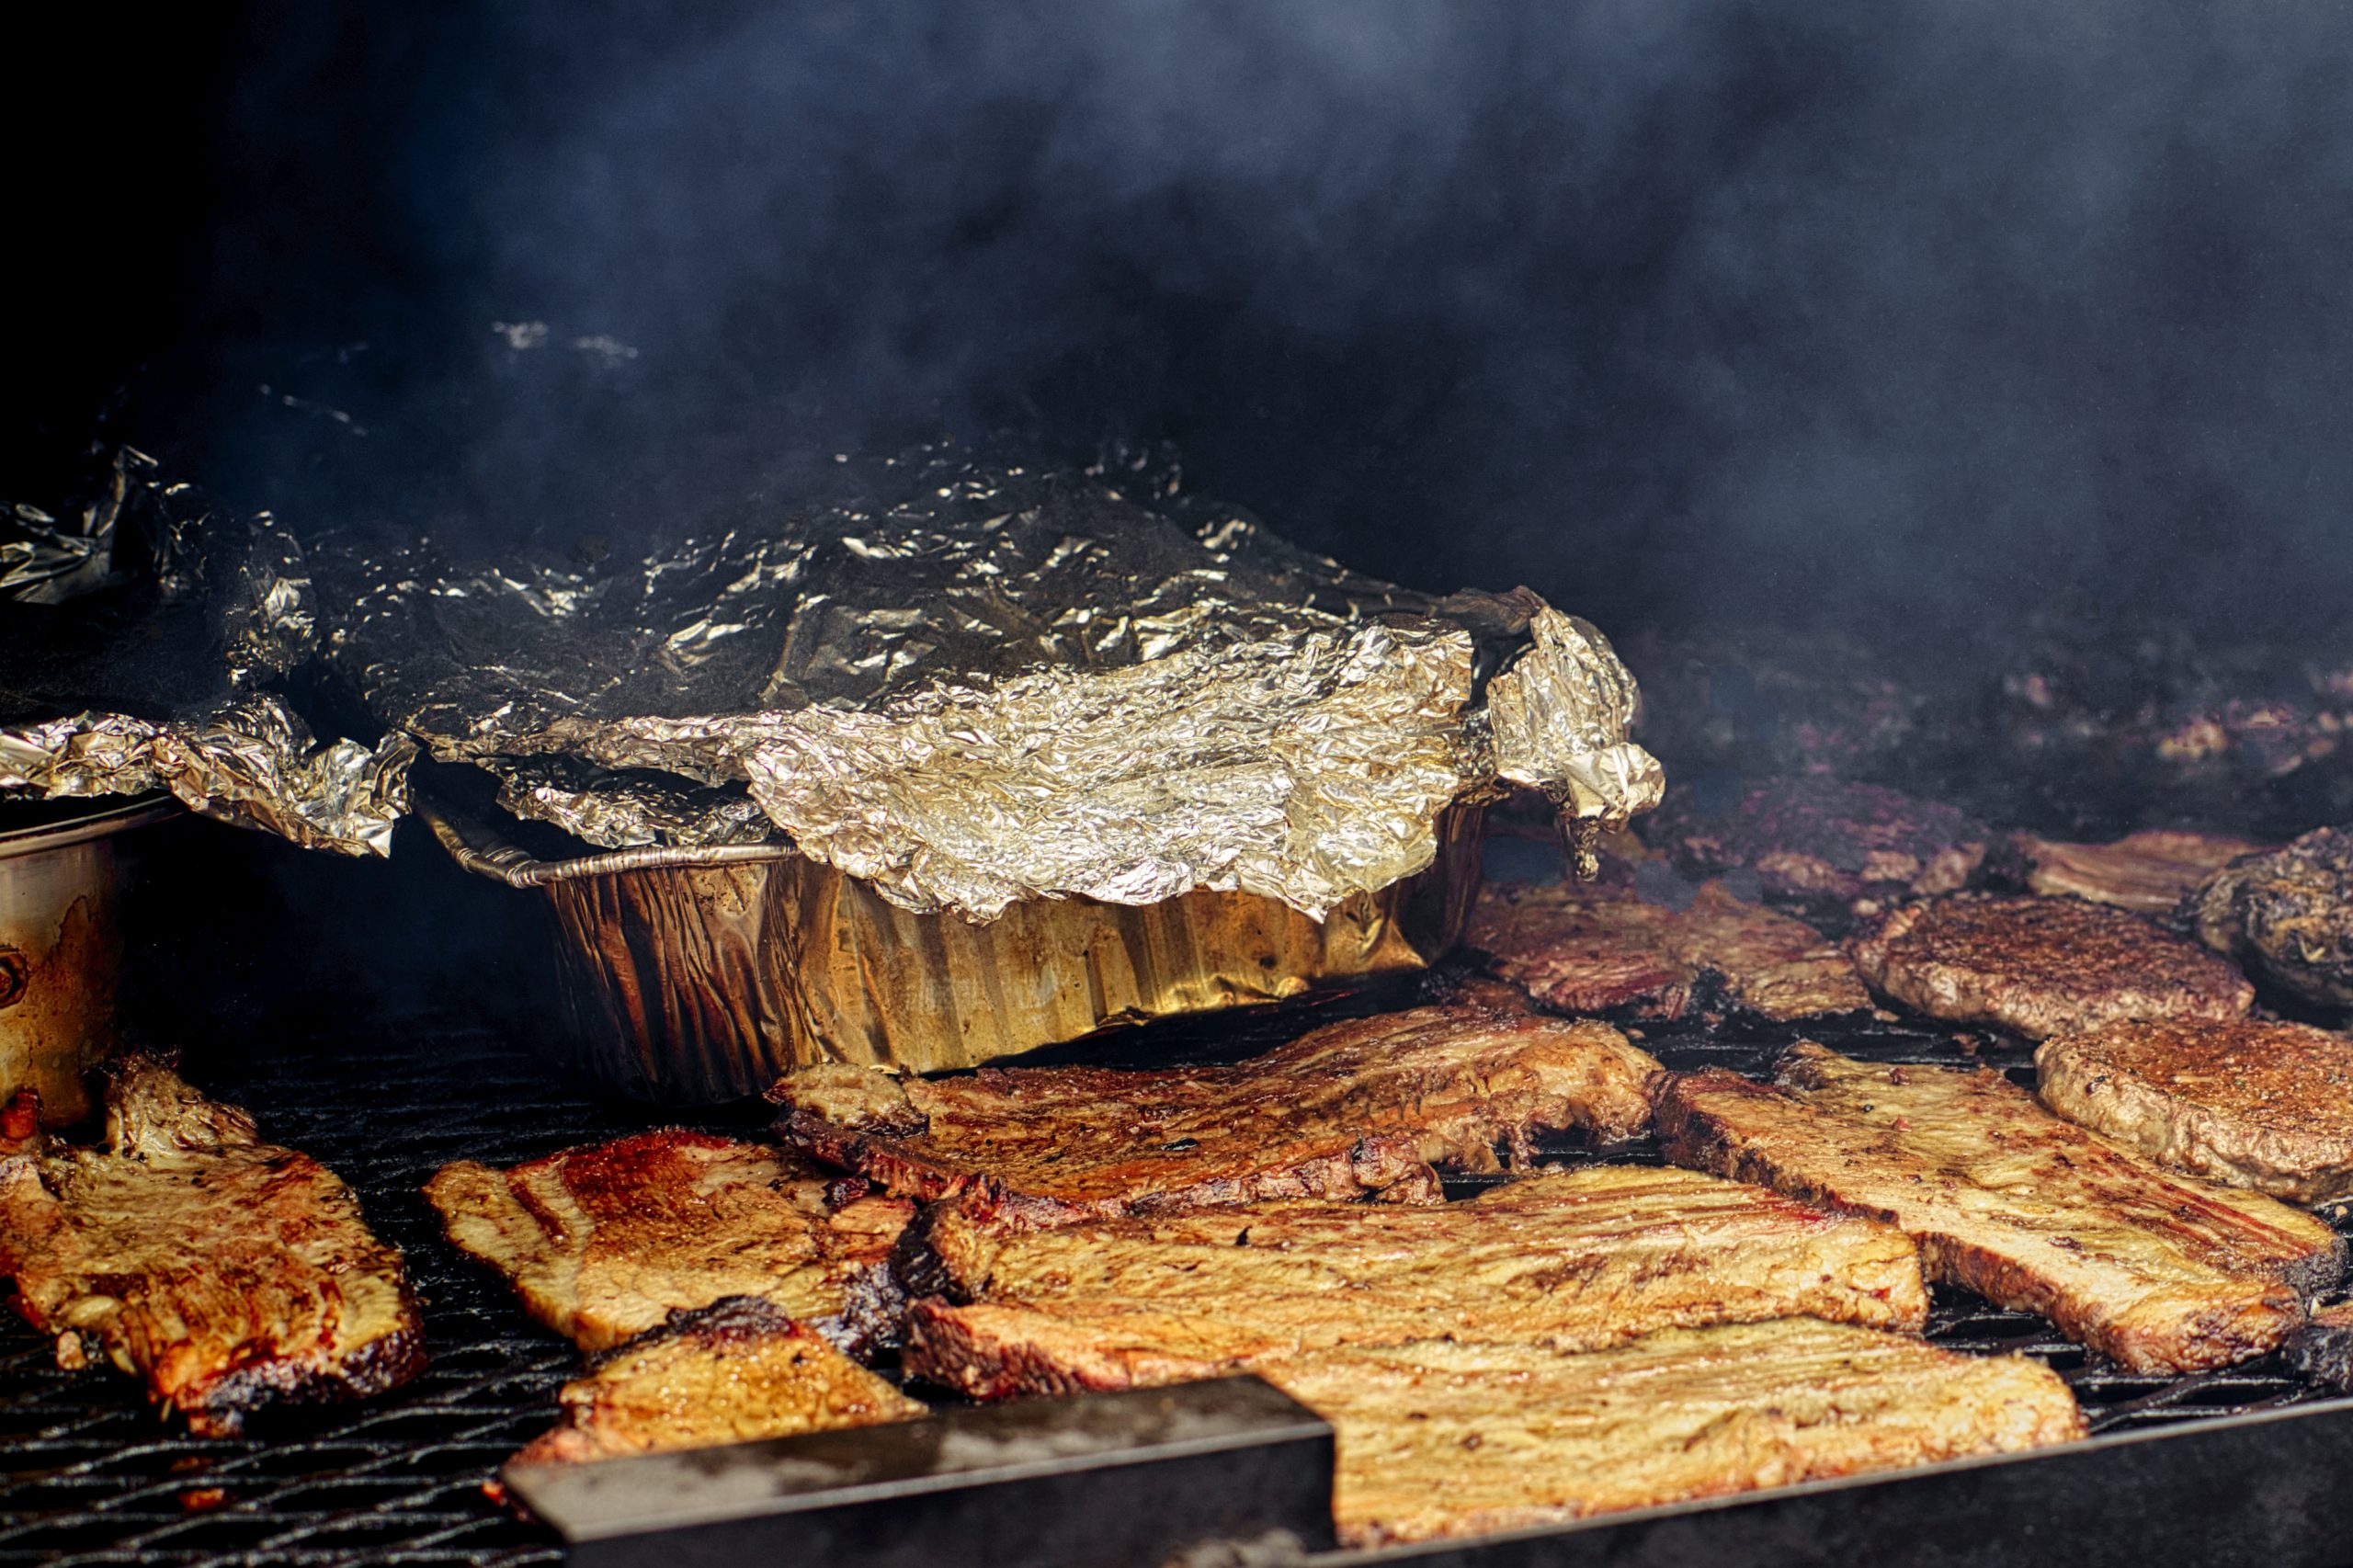 When it comes to street food, Bar-B-Que ranks near the top. From chicken to beef and pork, cooking meat on a grill can be found at most festivals.